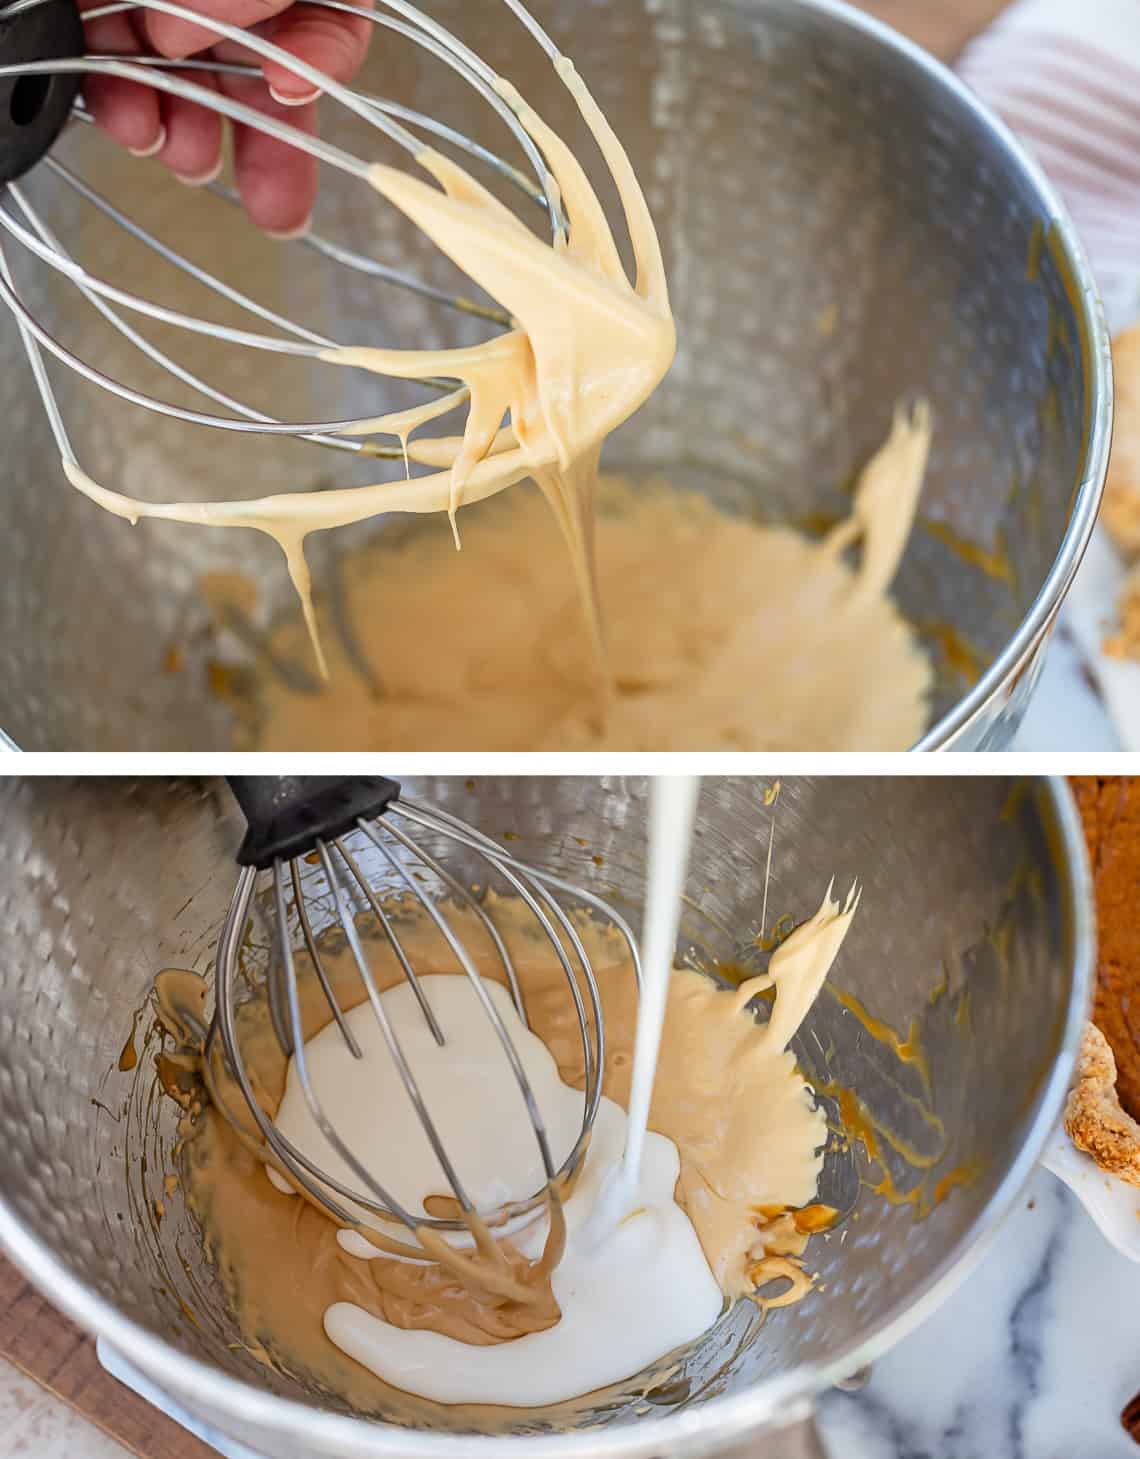 top whipped caramel dripping off a whisk into a mixing bowl, bottom adding cream to bowl to whip.